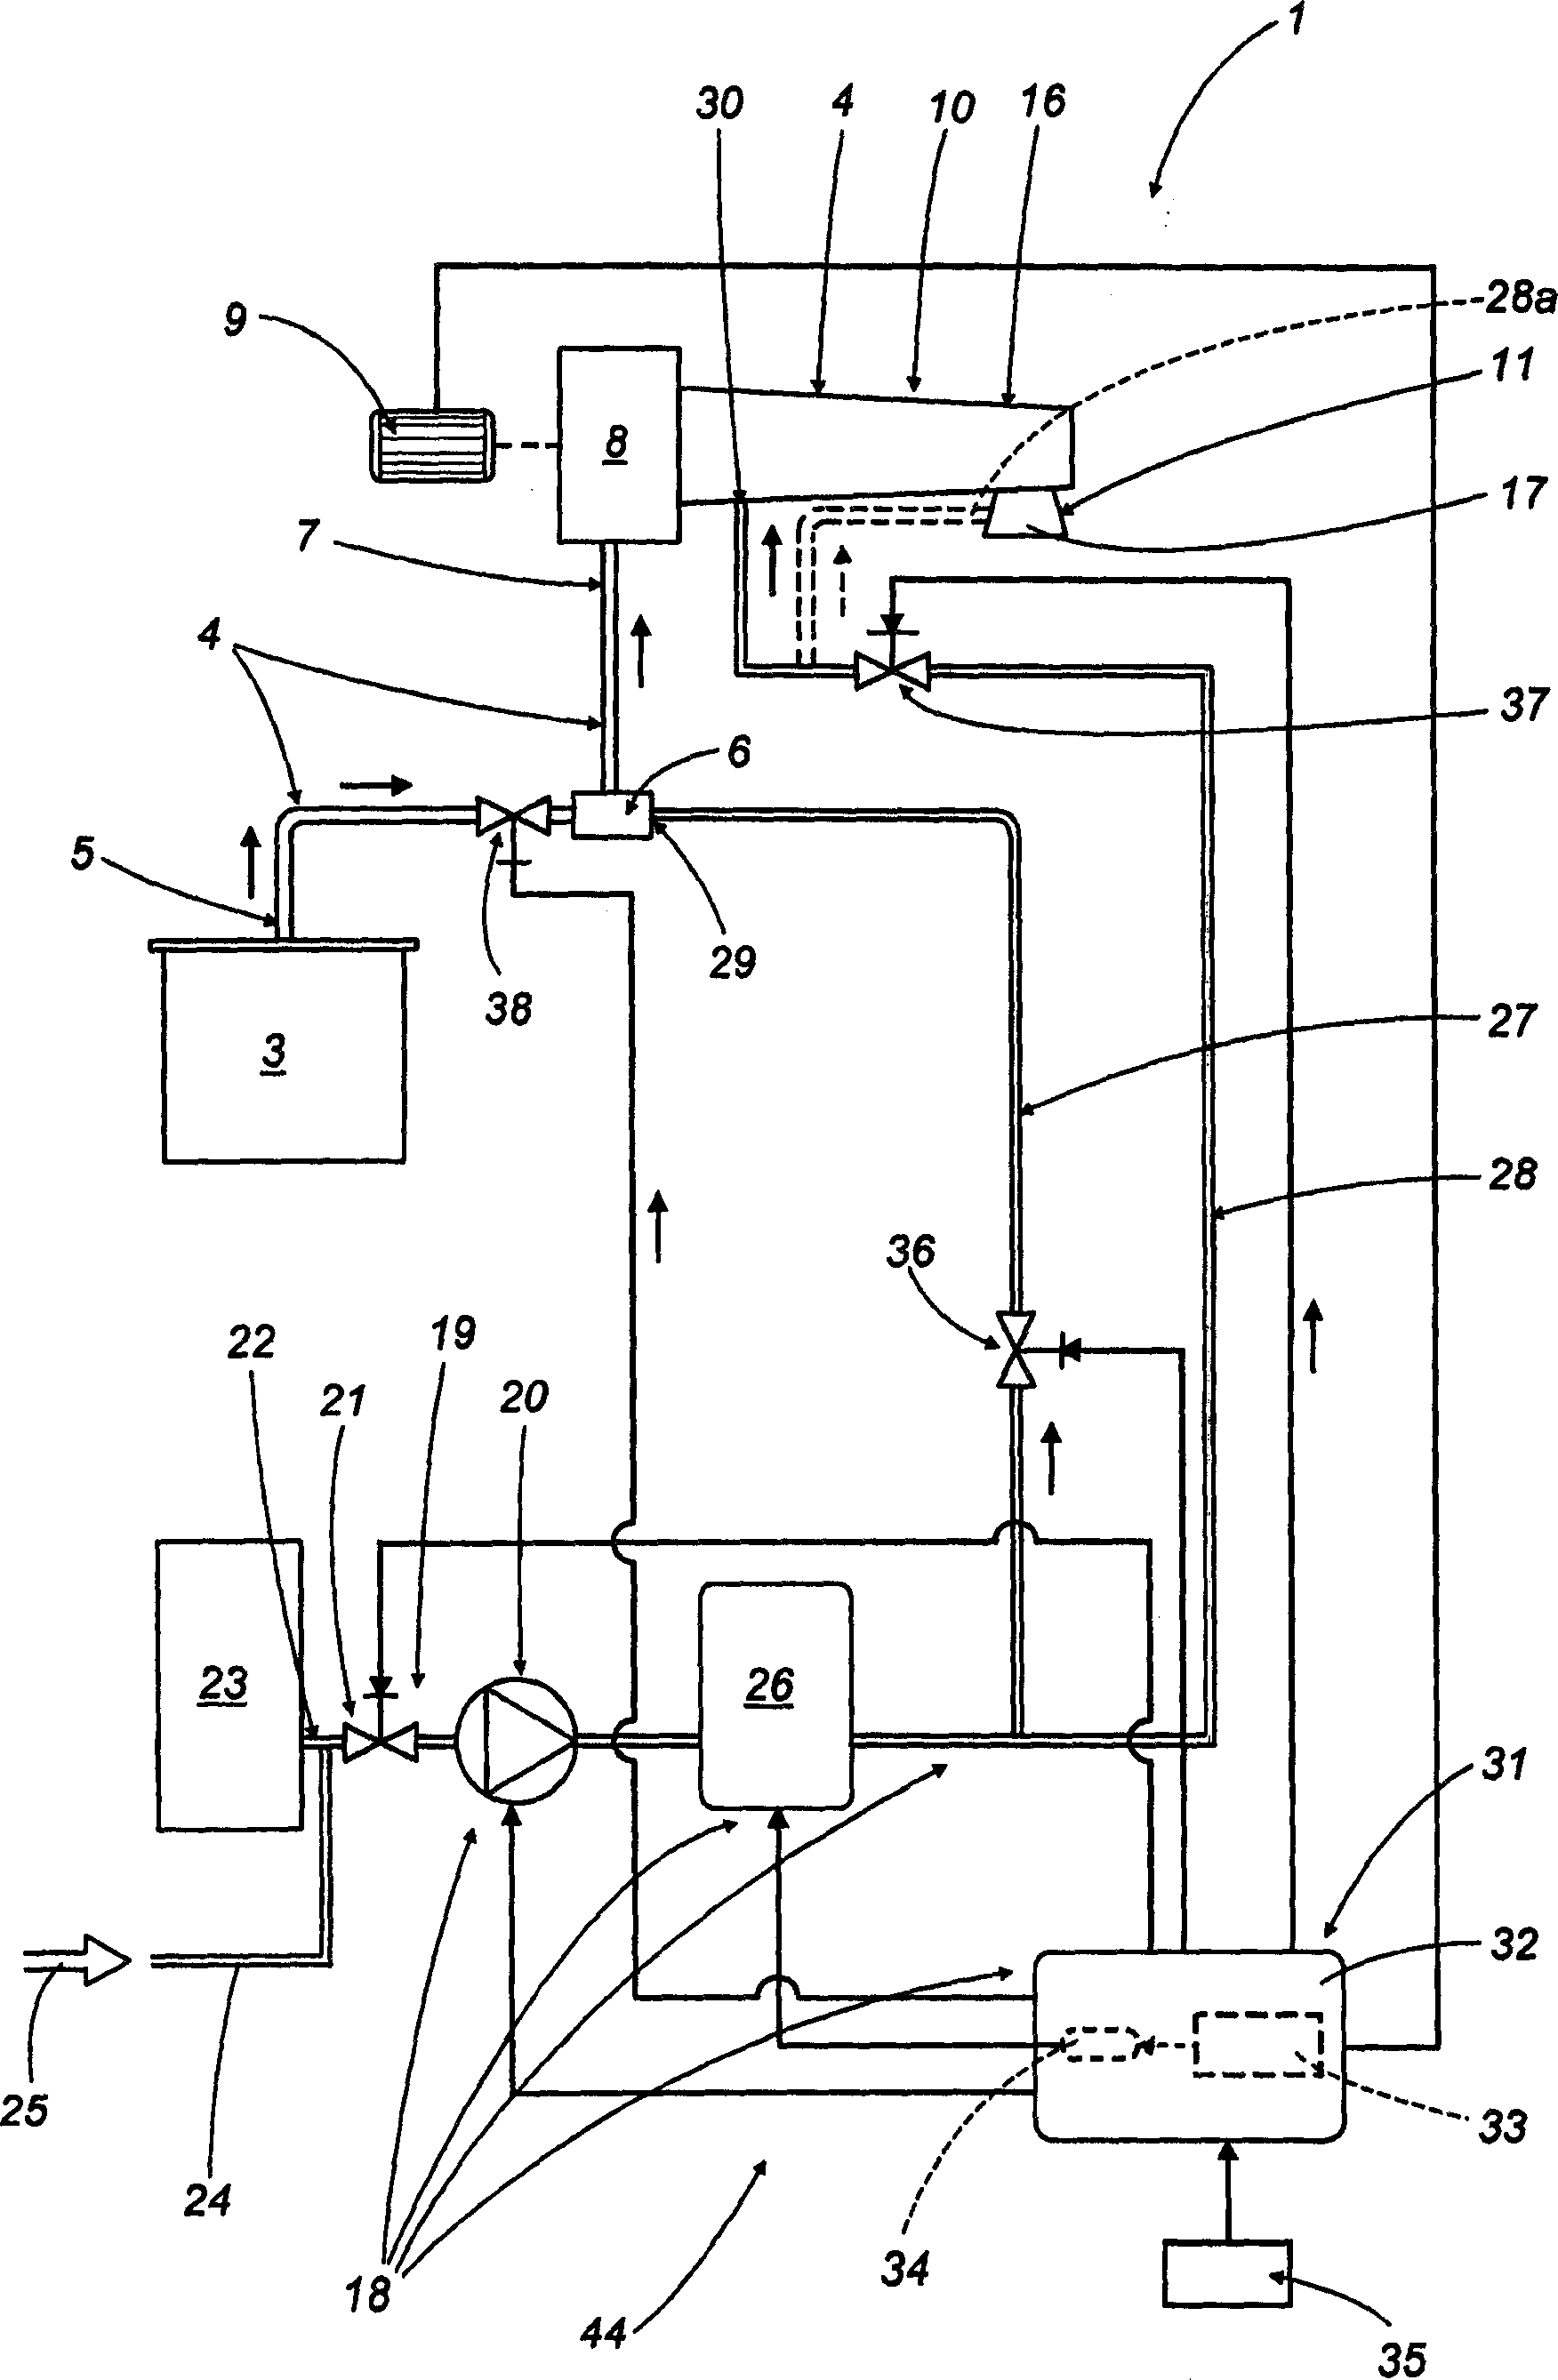 Machine and method for producing and dispensing liquid or semi-liquid consumer food products